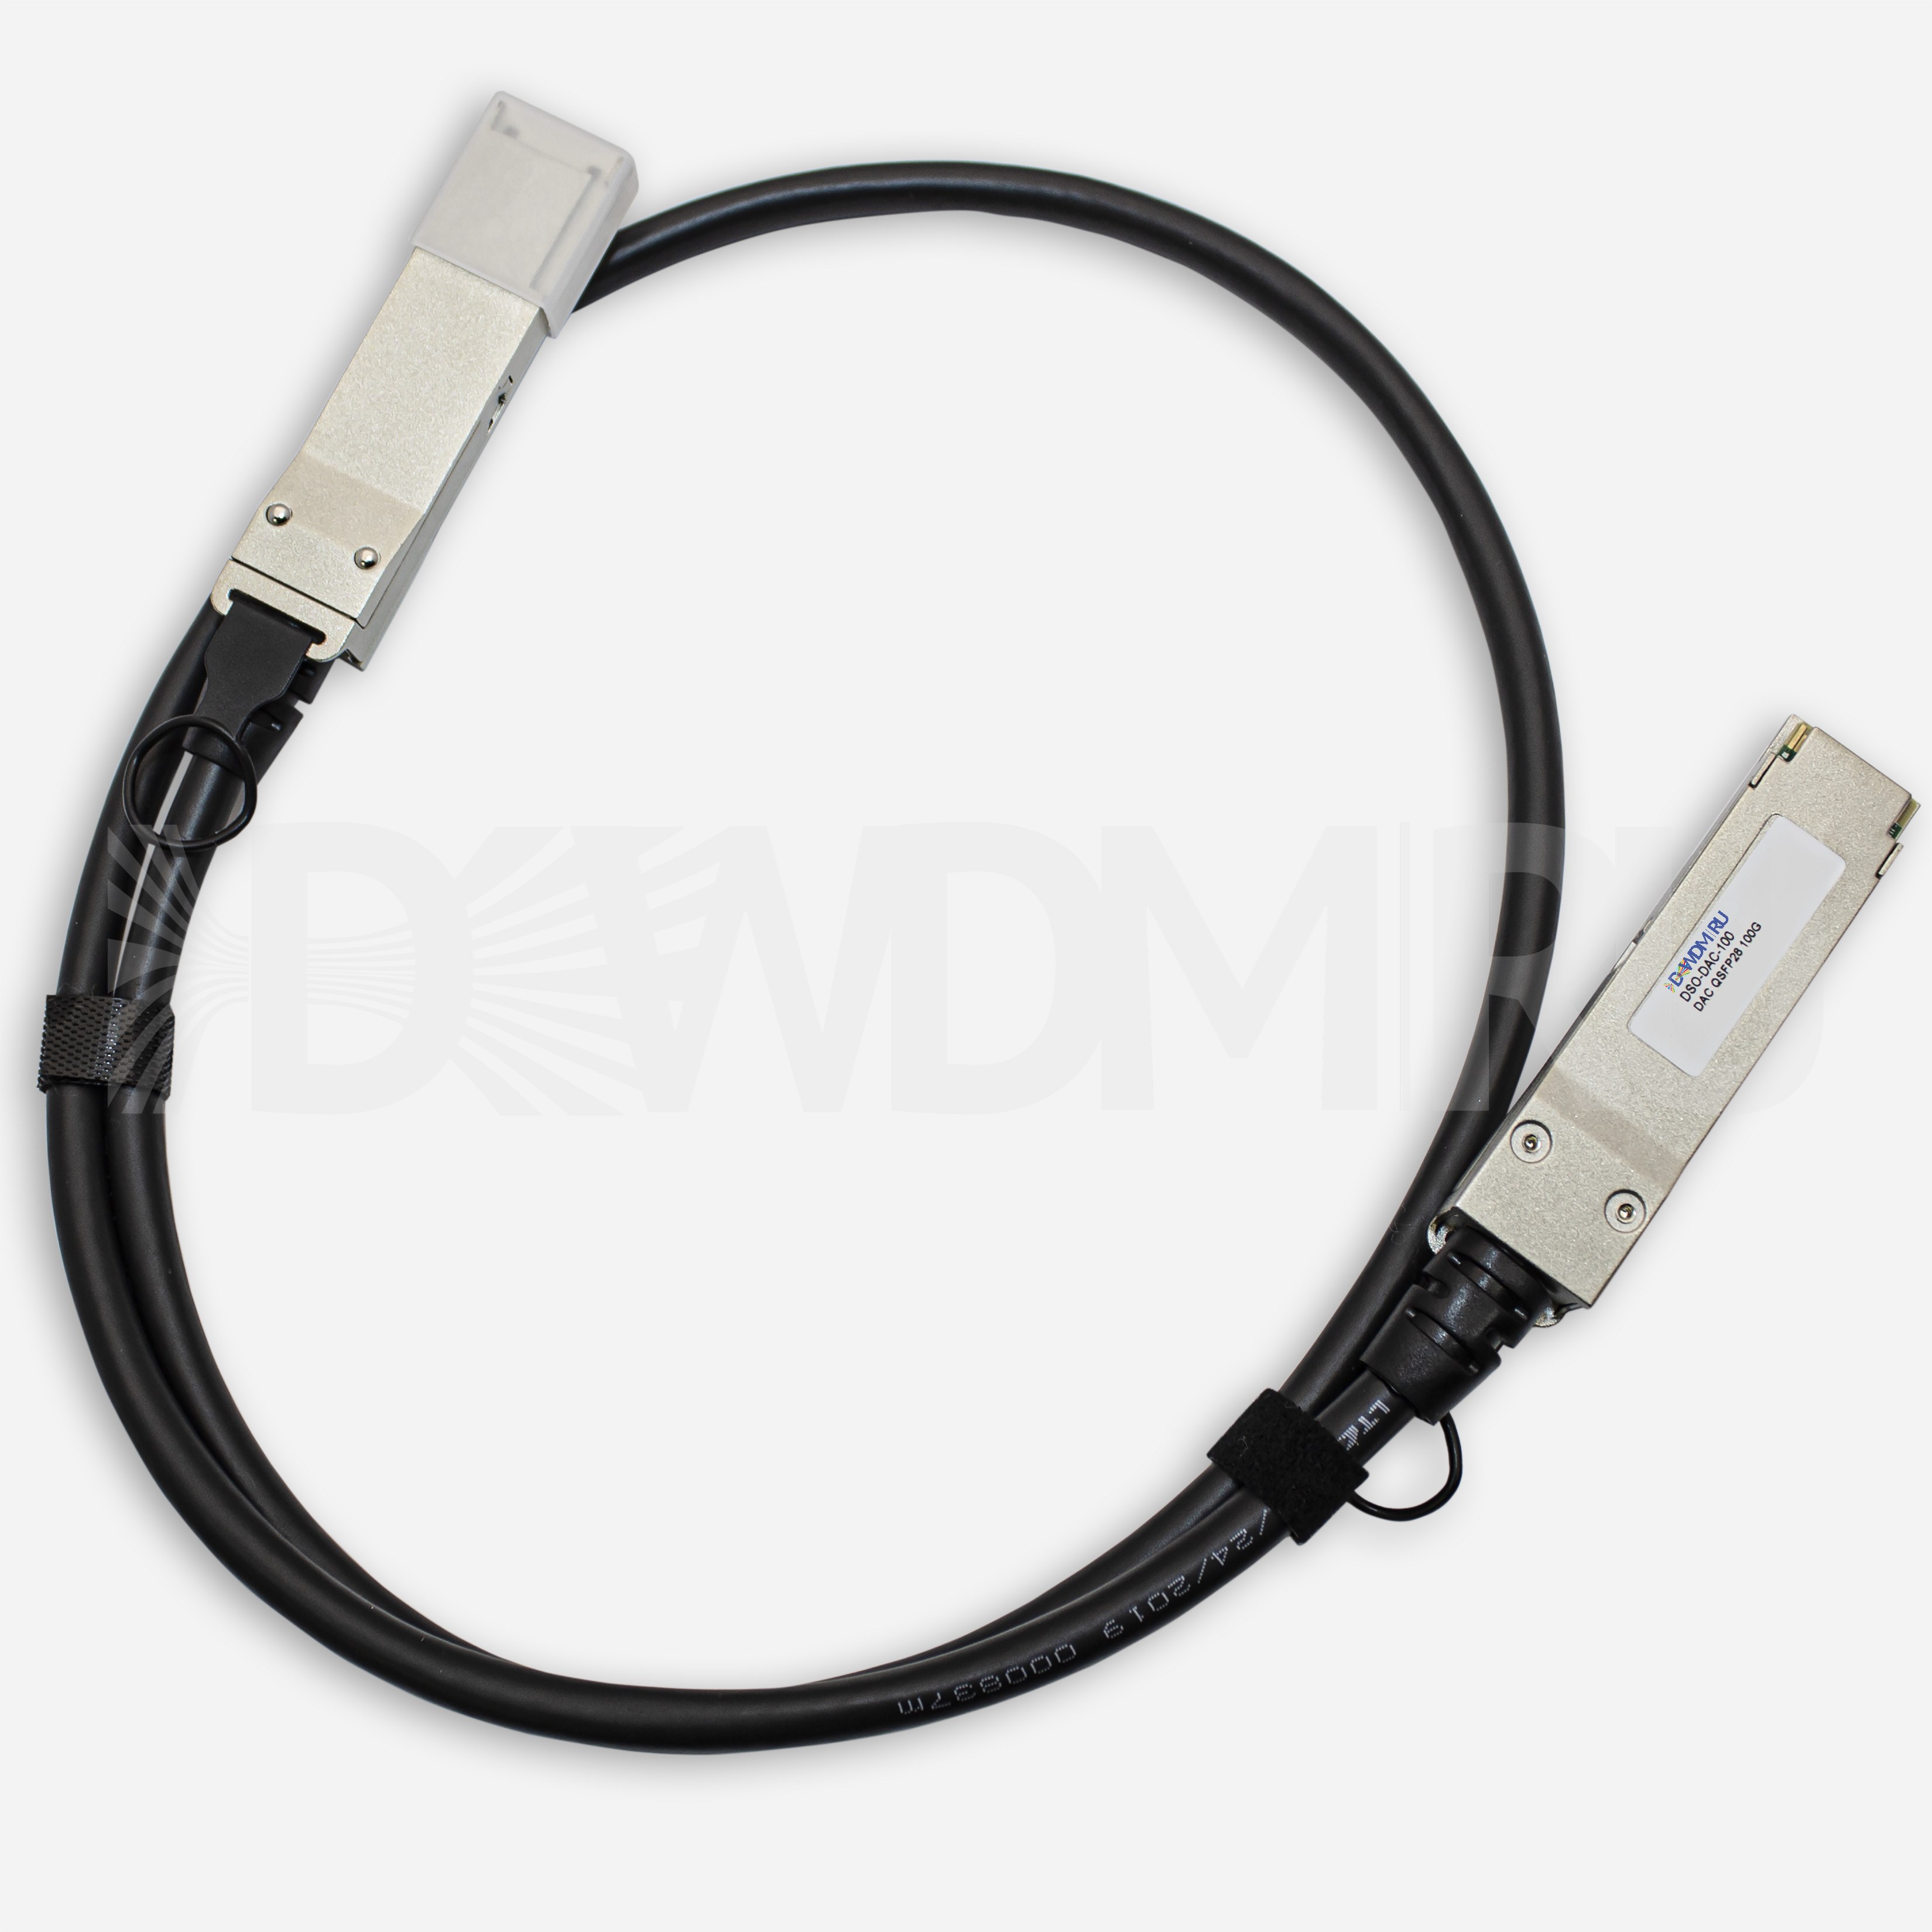 Кабель Direct Attached, QSFP28, 100 Гб/с, 3 м - ДВДМ.РУ (DSO-DAC-100-3)